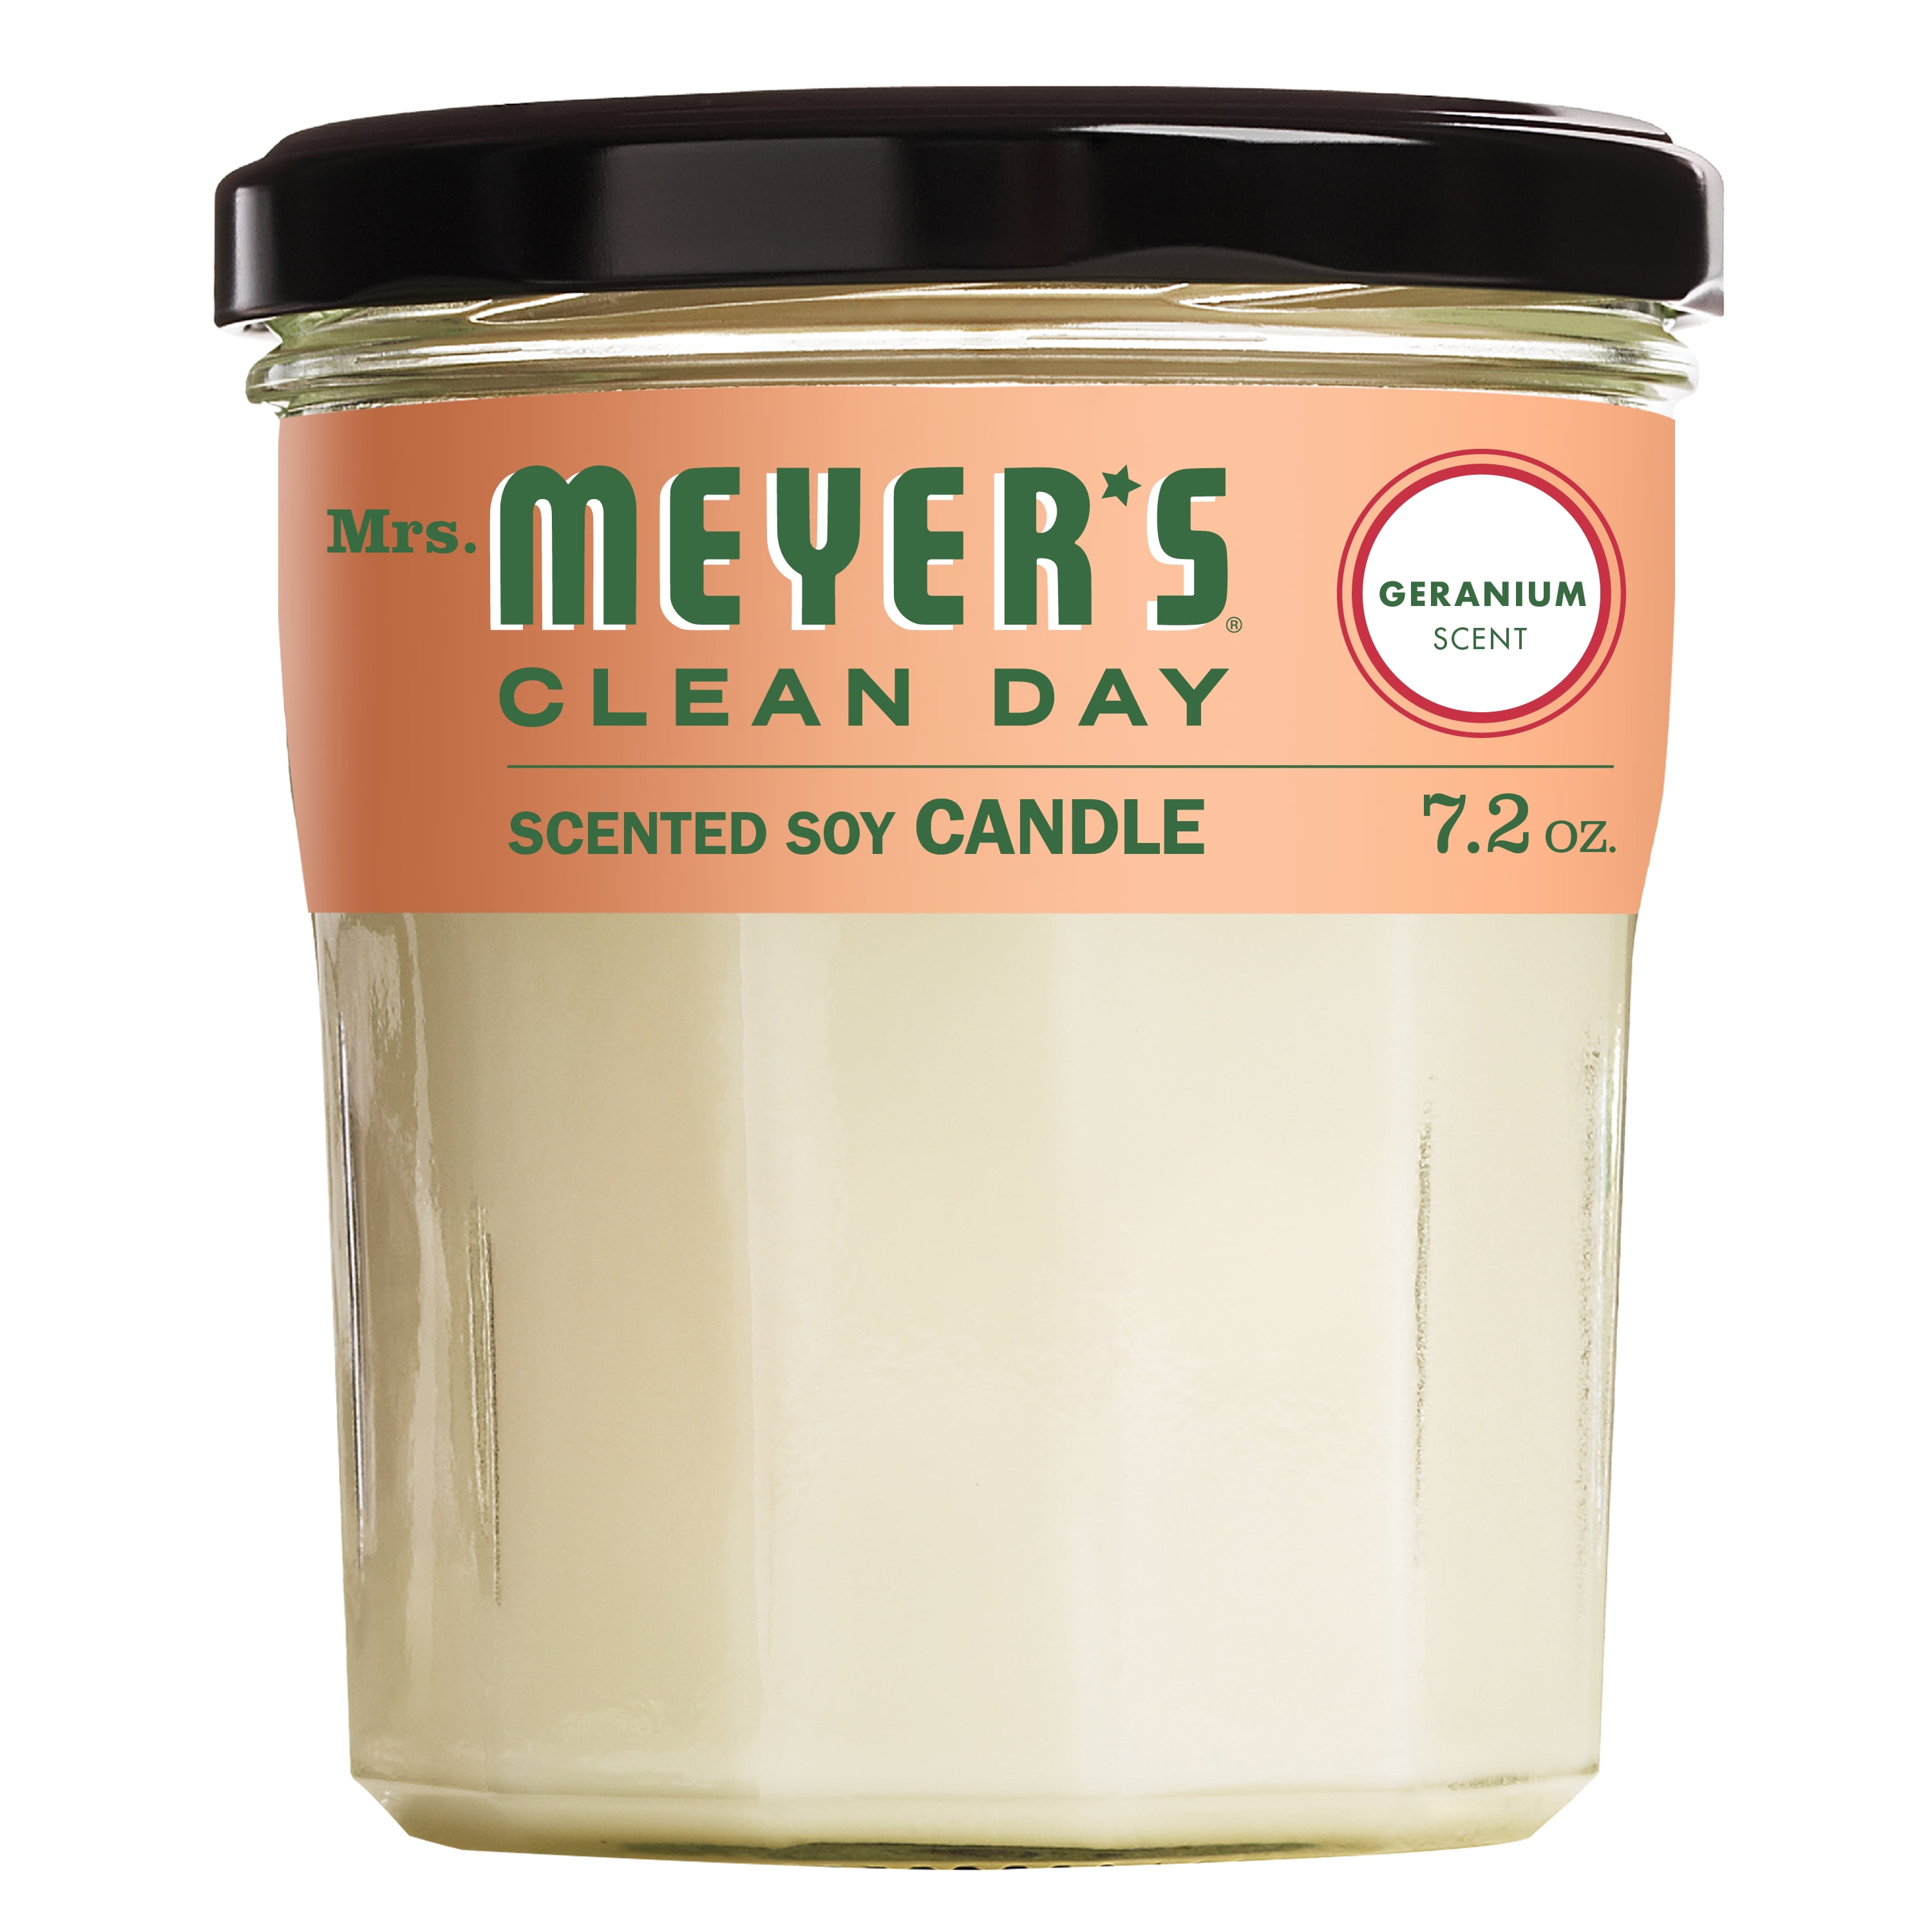 7.2 Oz Lot Of 2 Mrs Meyer's Clean Day Honeysuckle Scented Soy Candle 